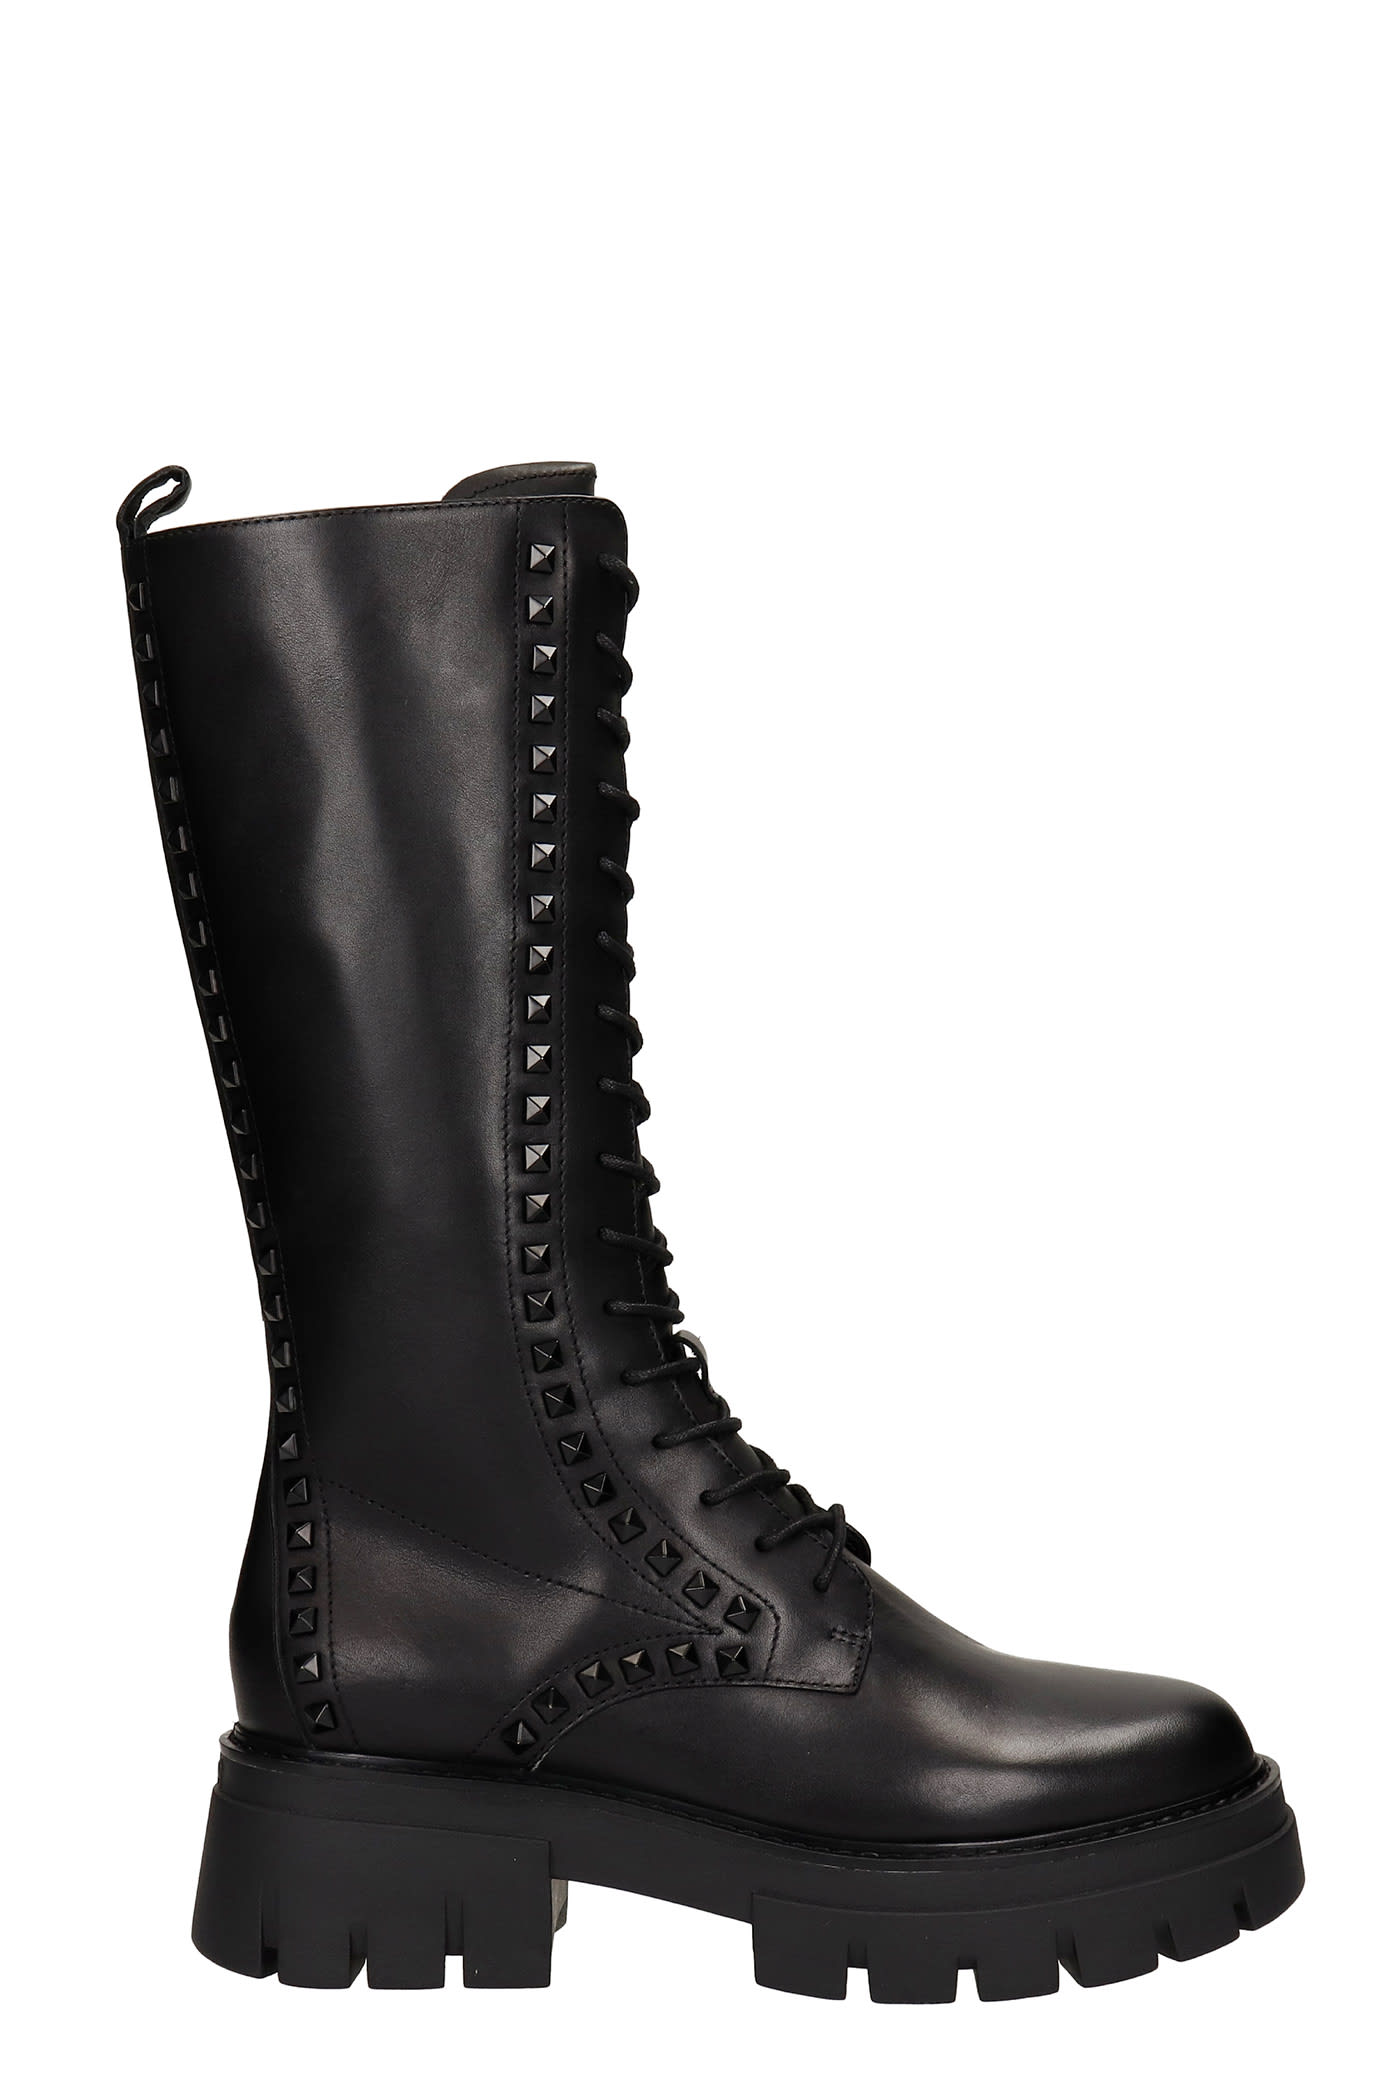 Ash Lullaby Studs Combat Boots In Black Leather